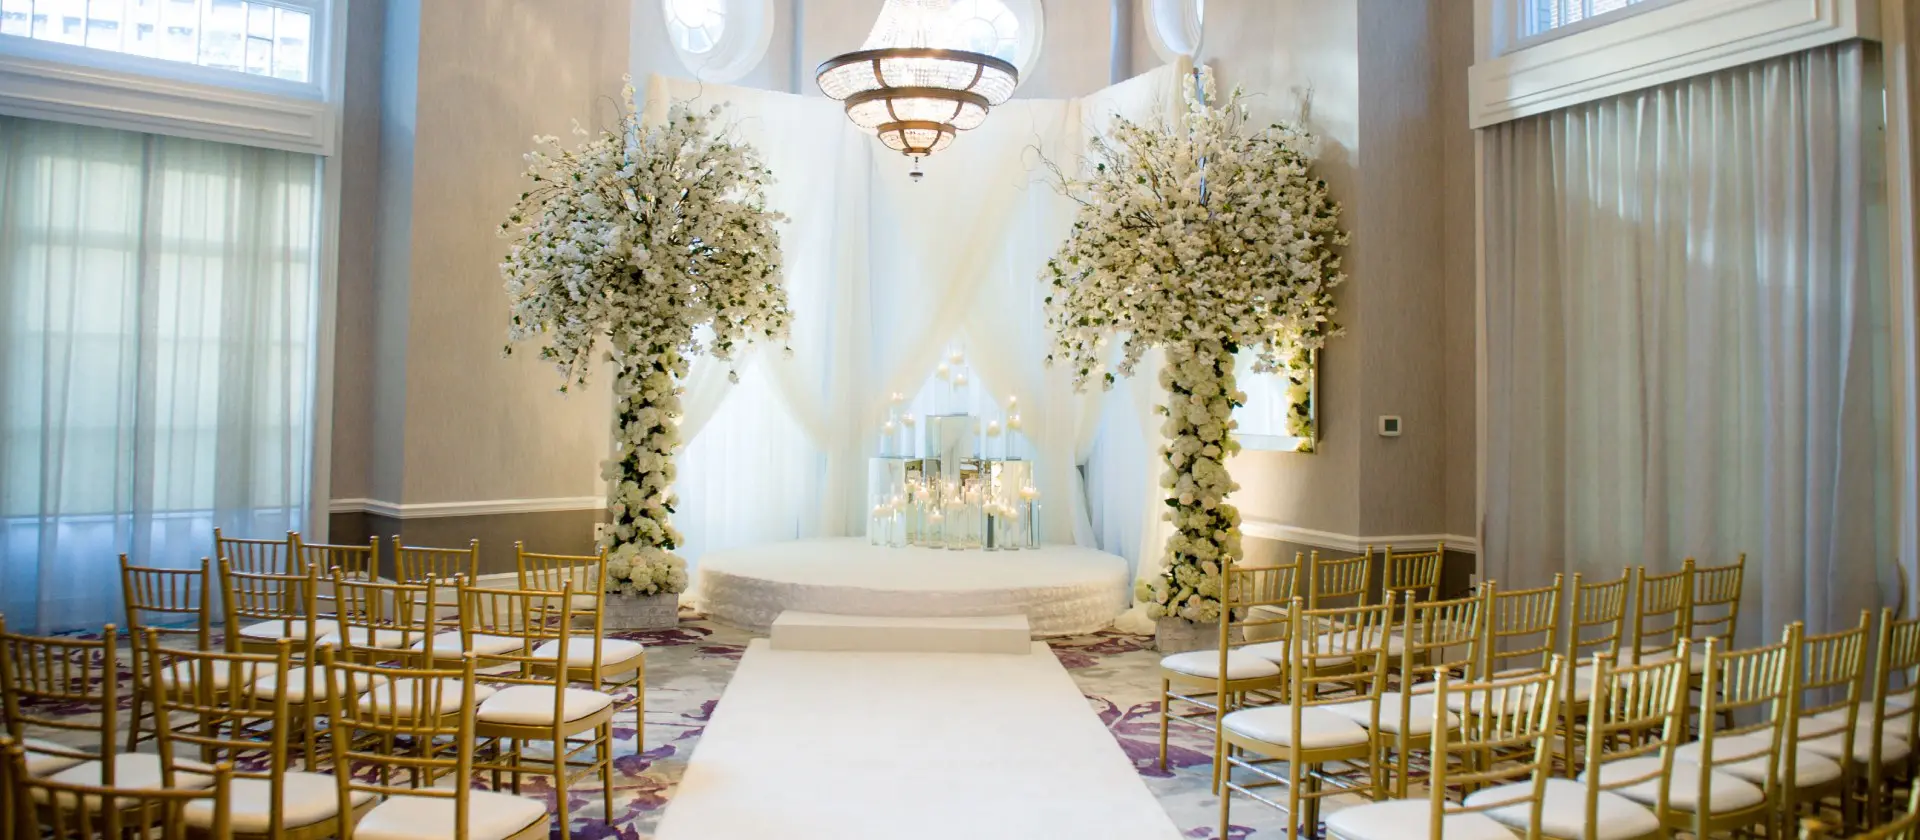 A wedding ceremony with white flowers and gold chairs.